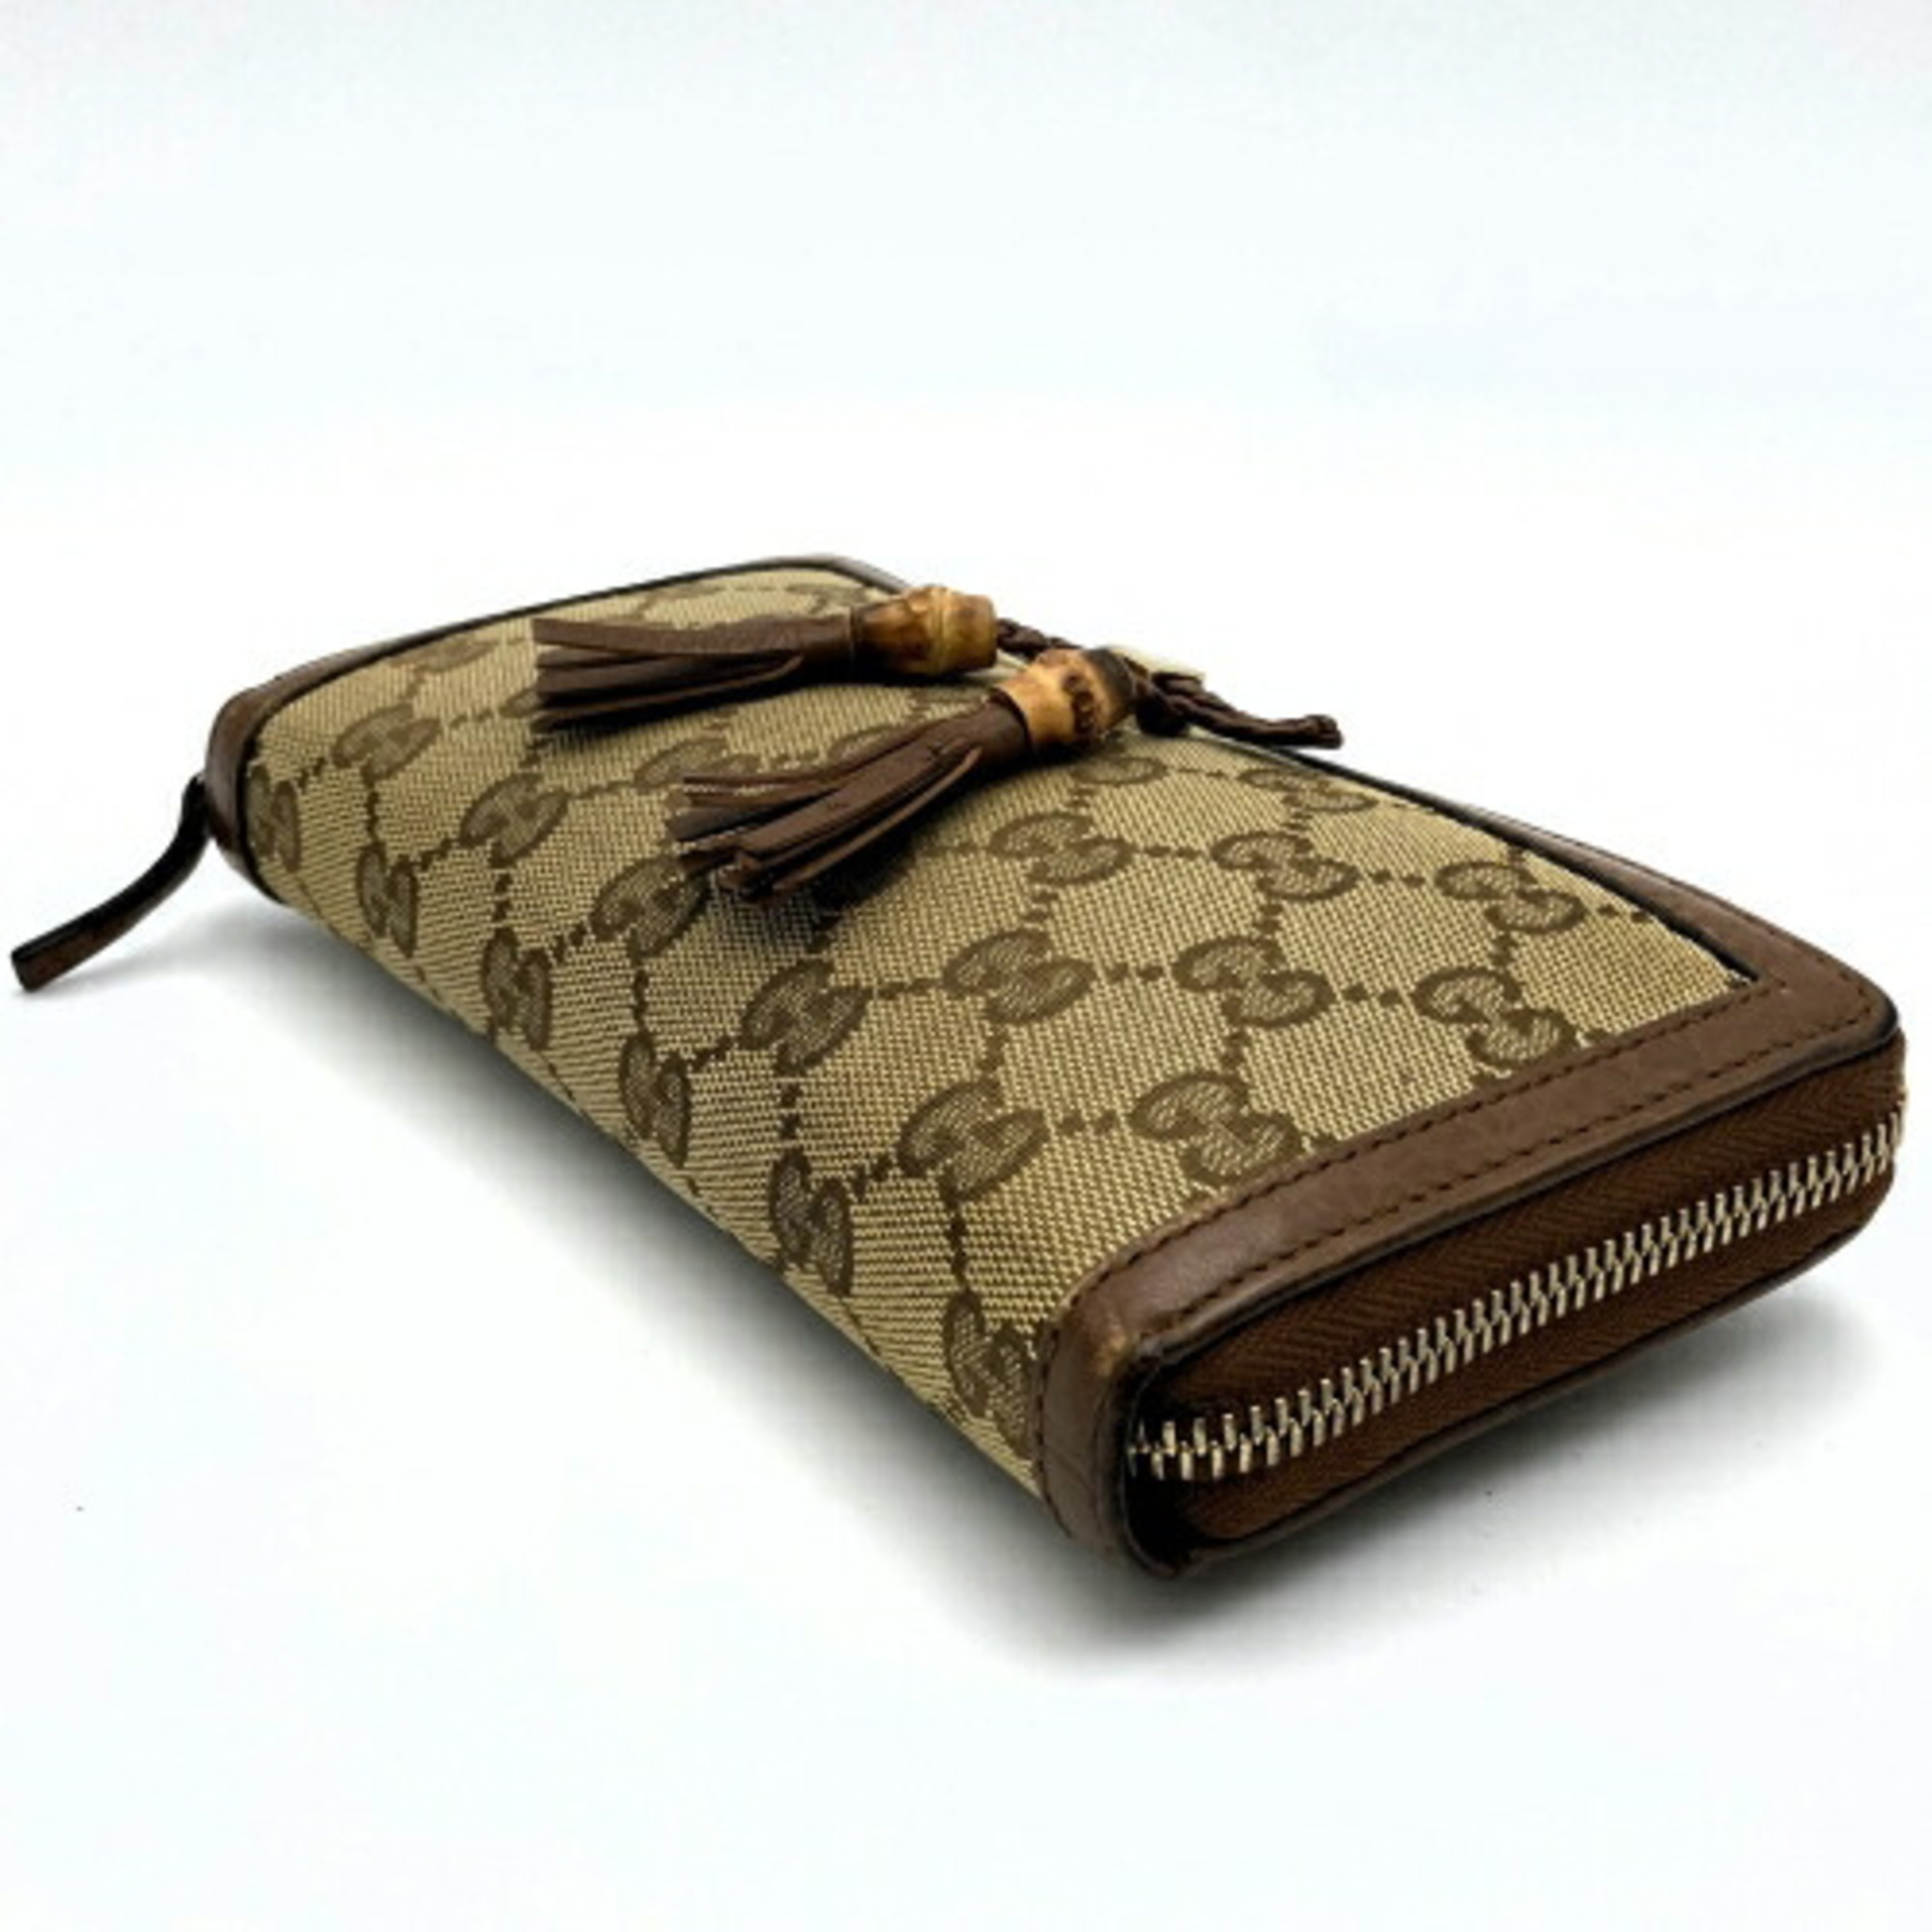 GUCCI GG pattern long wallet brown canvas ladies fashion accessory 269991 USED ITQDY8MBLXEW